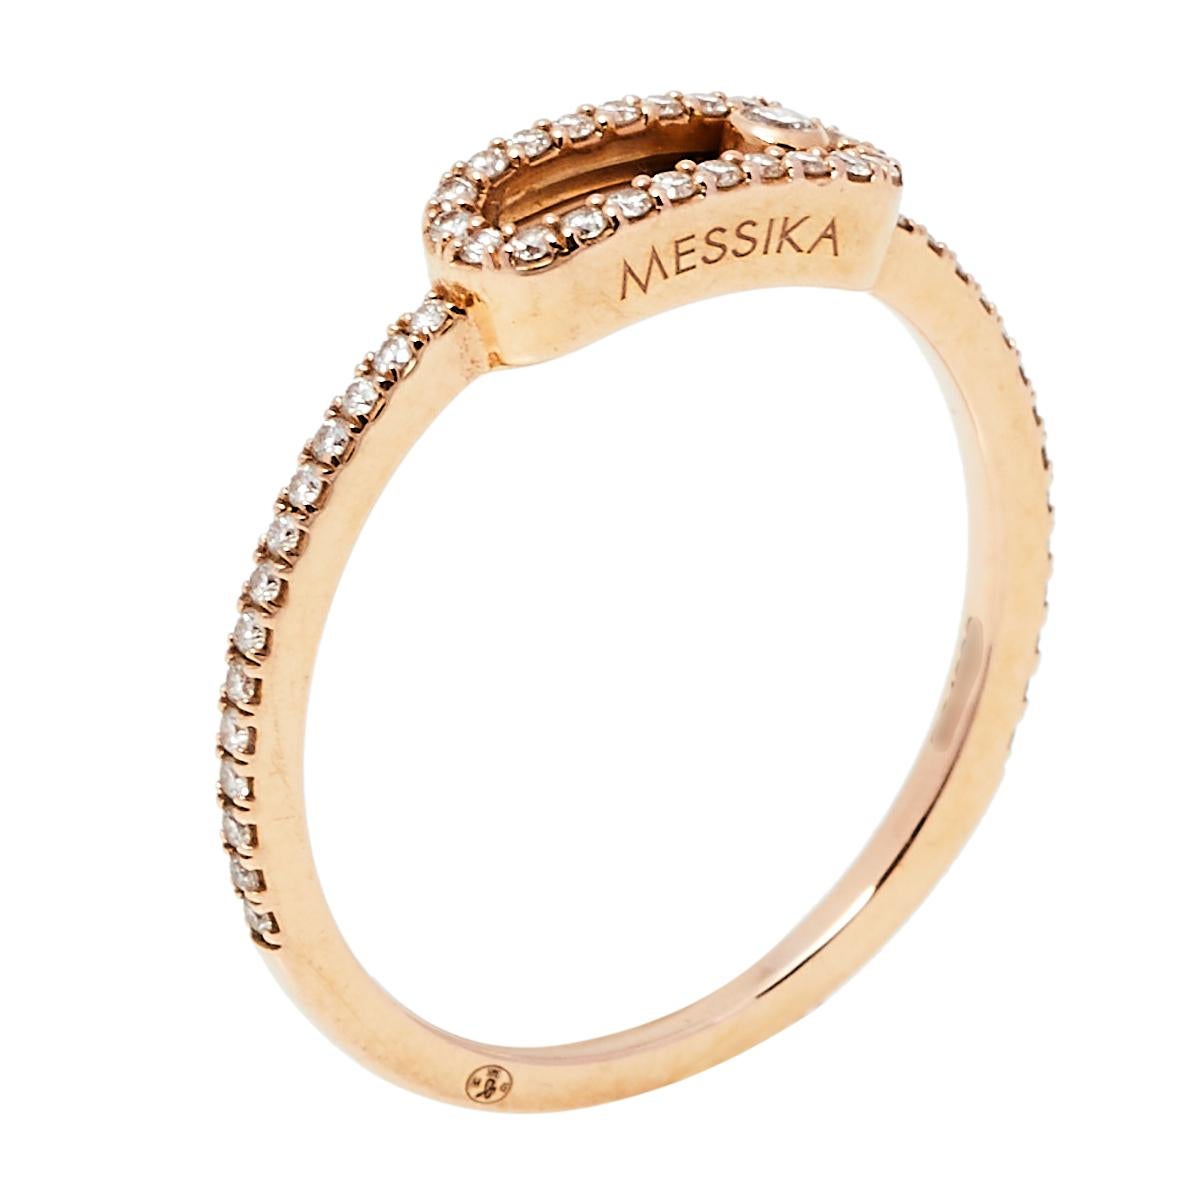 Contemporary Messika Move Uno Pave Diamond 18K Rose Gold Ring Size 51